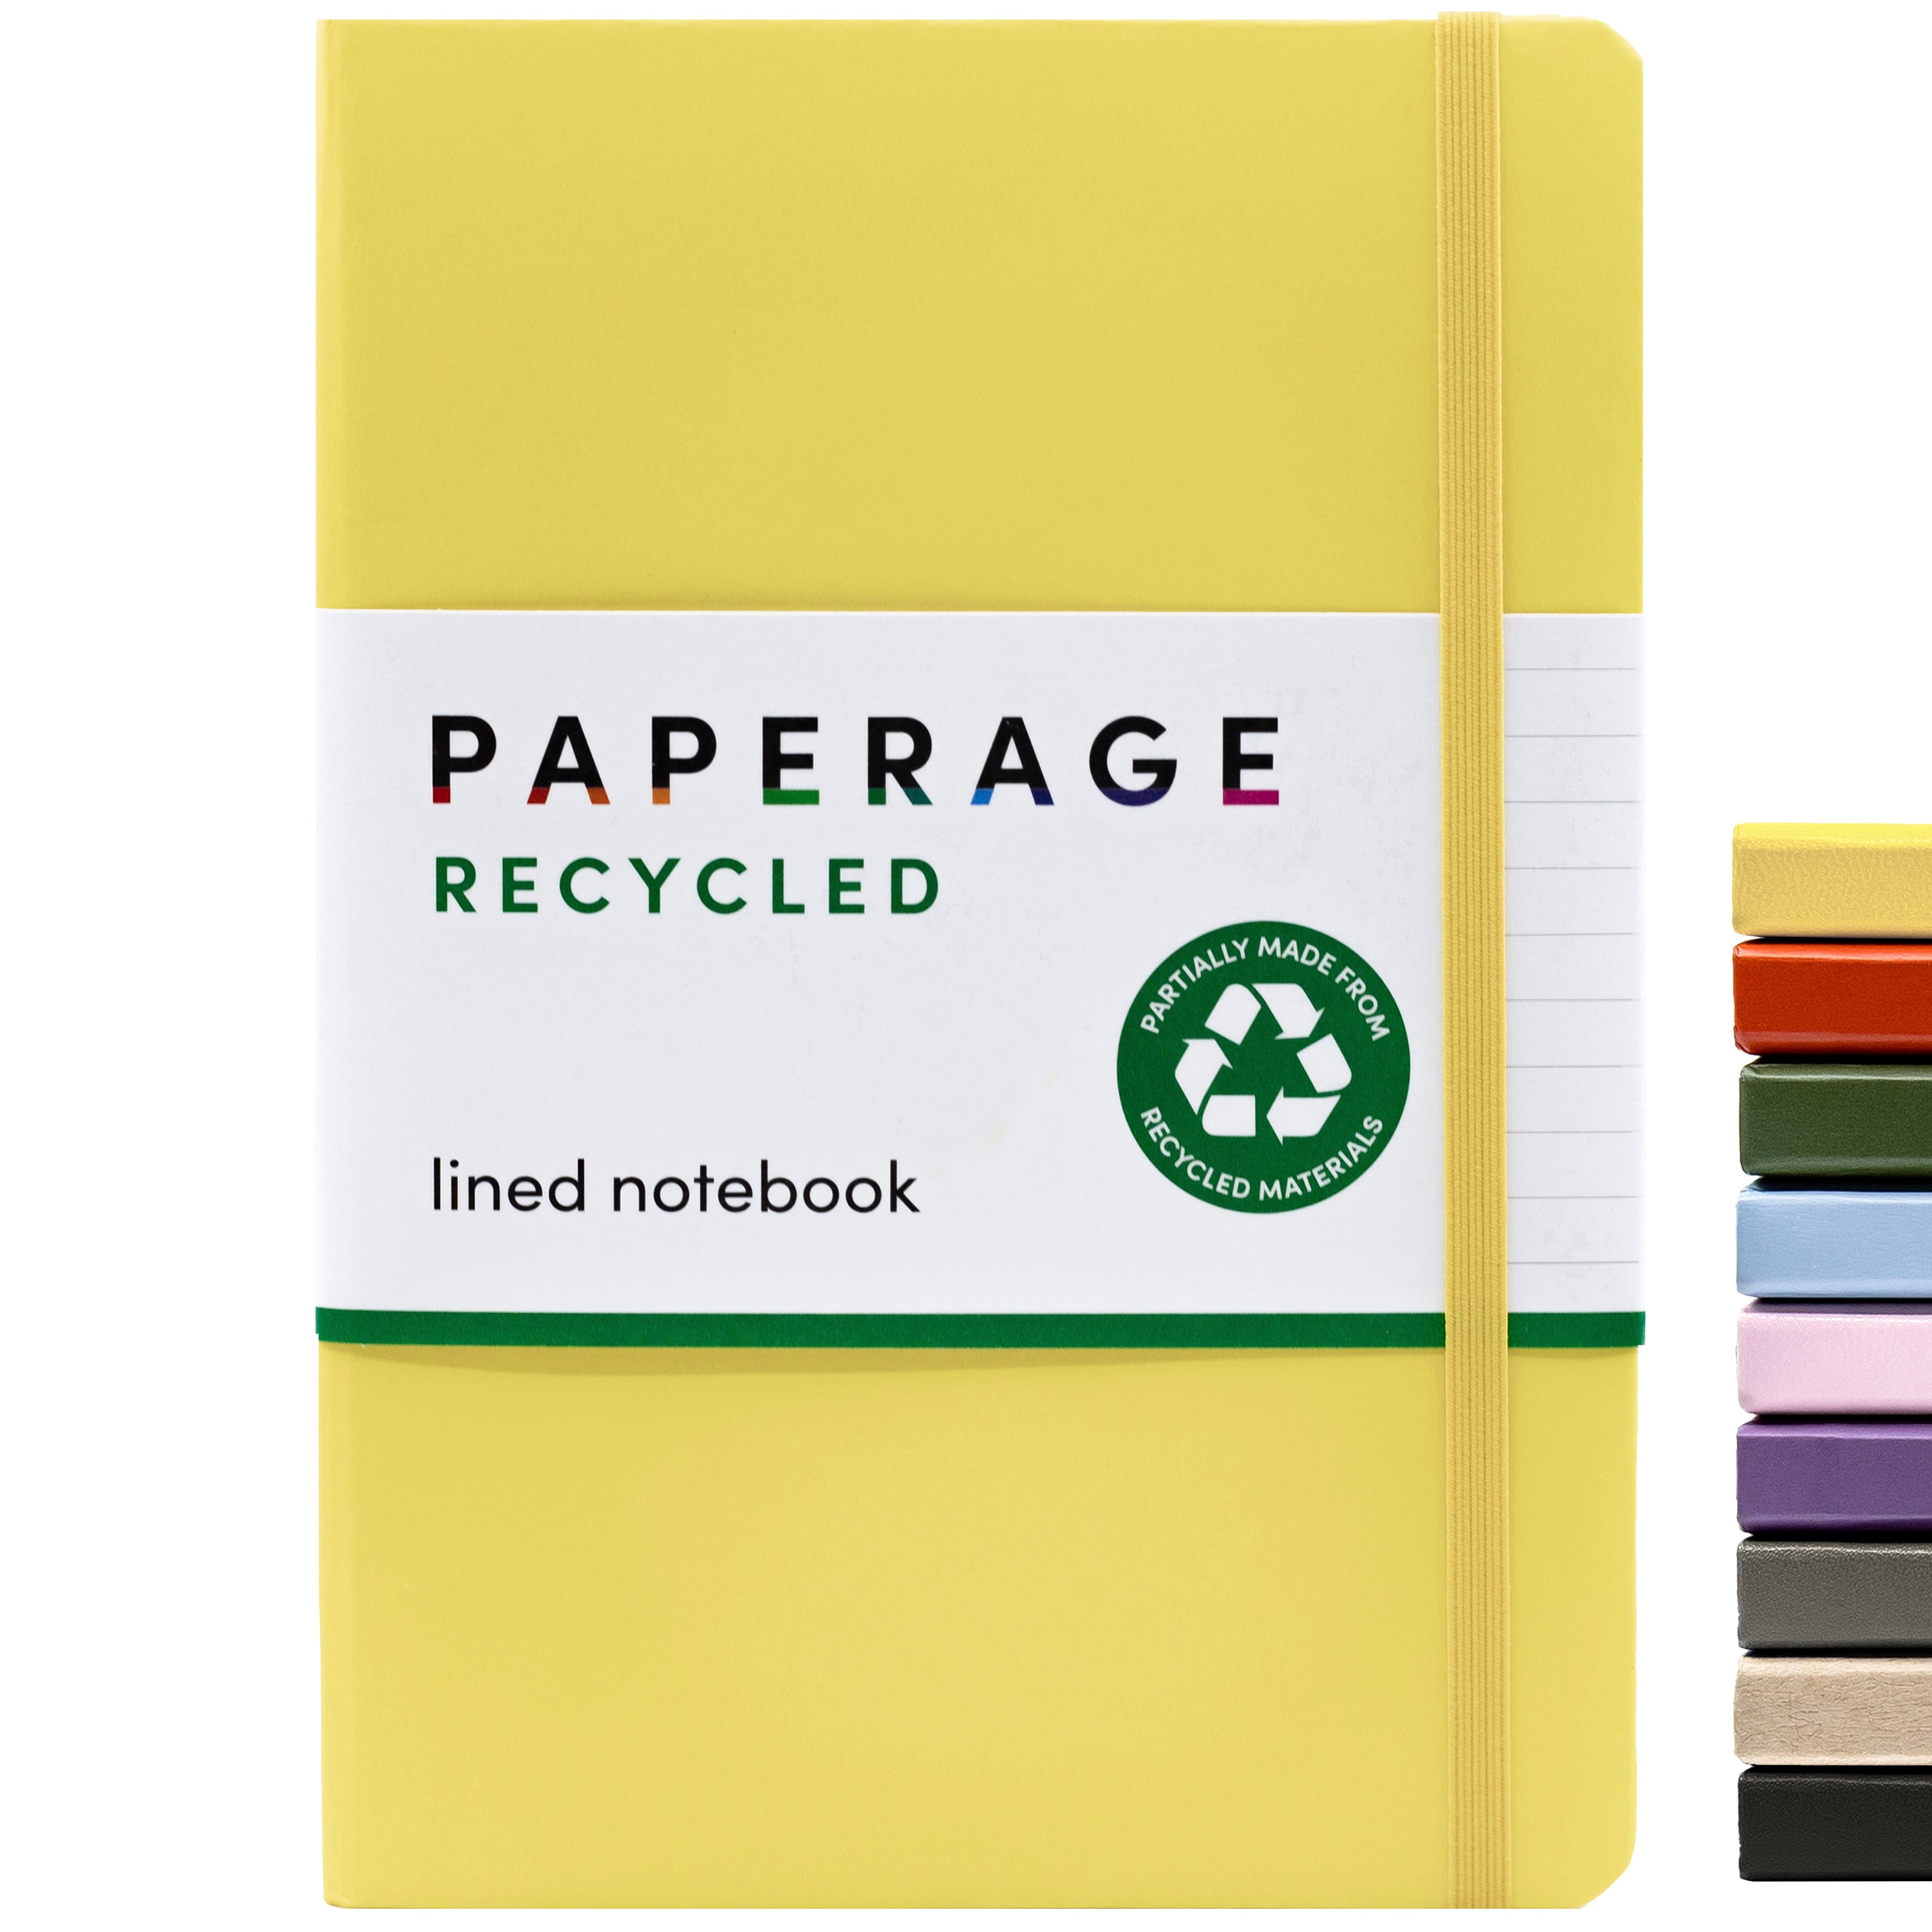 Recycled Lined Journal Notebook, Hardcover (5.7 in x 8 in)